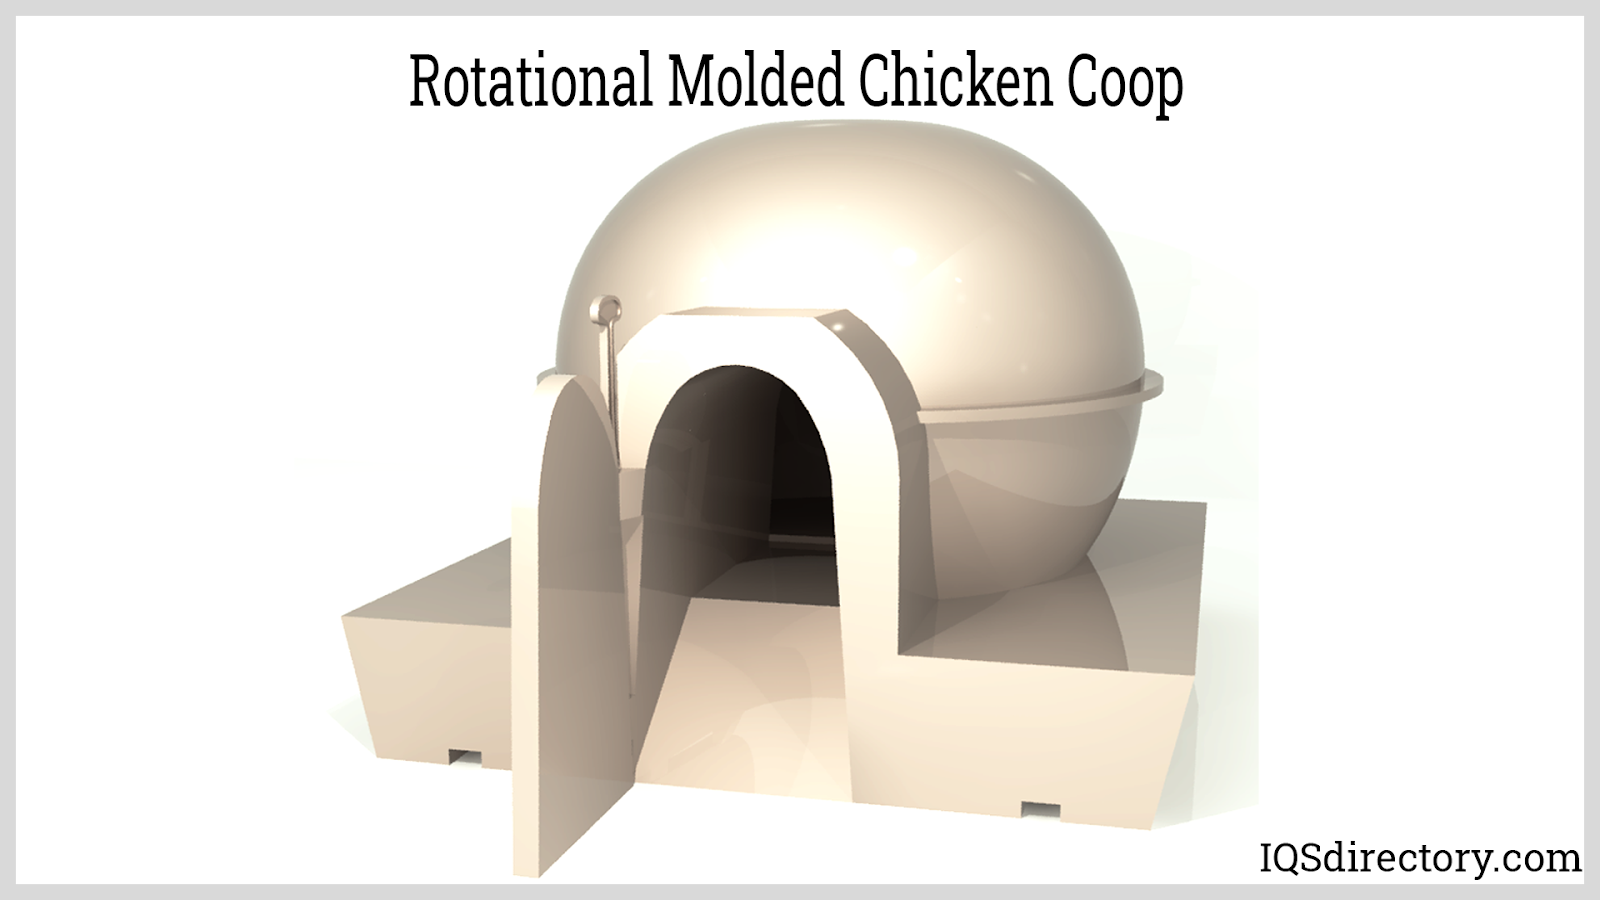 Rotational Molding: What Is It? How Does It Work? Types Of